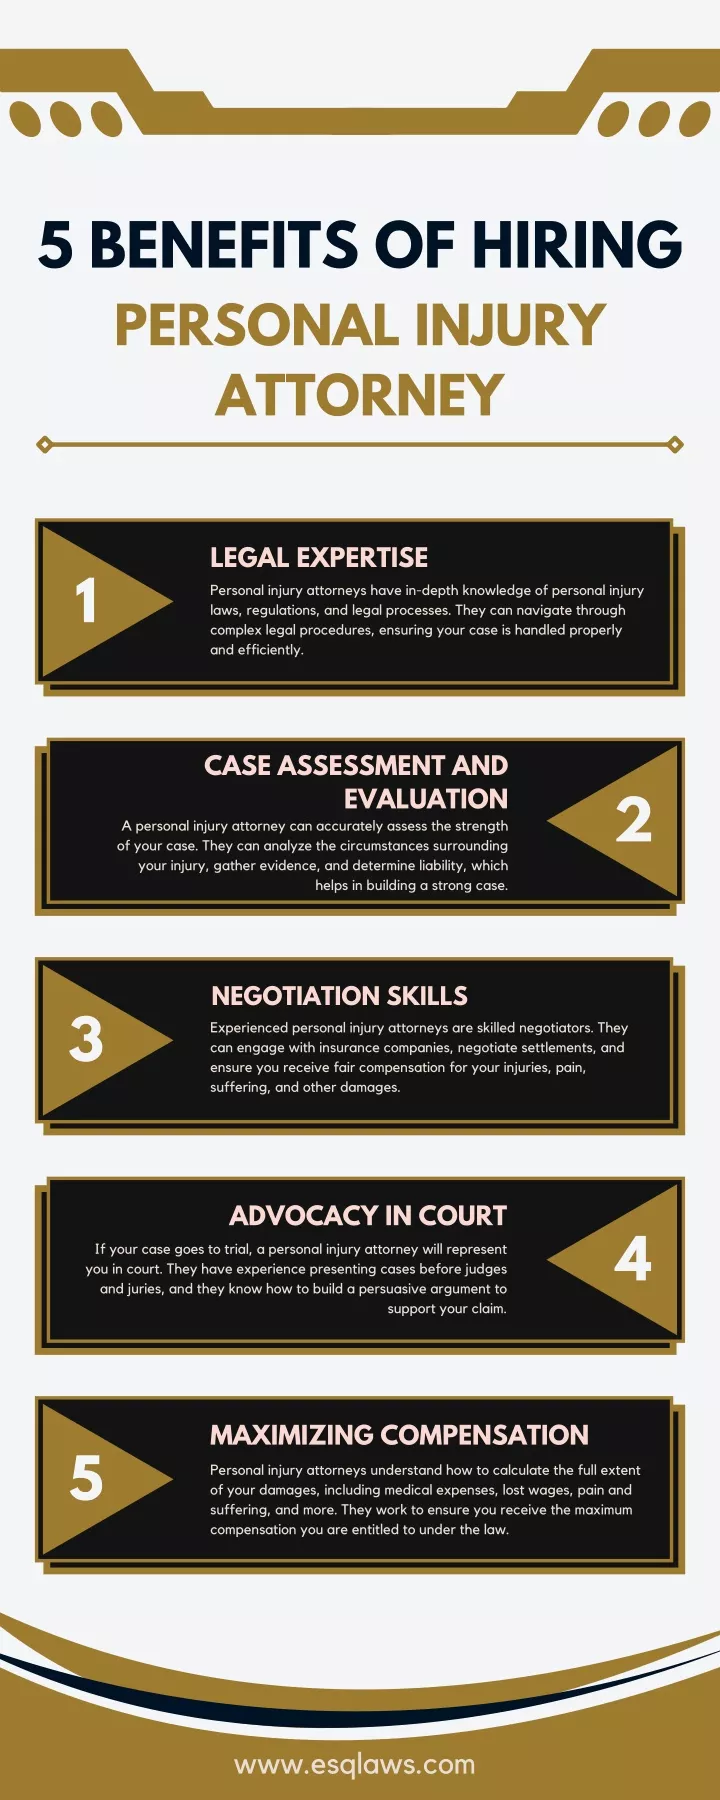 5 benefits of hiring personal injury attorney